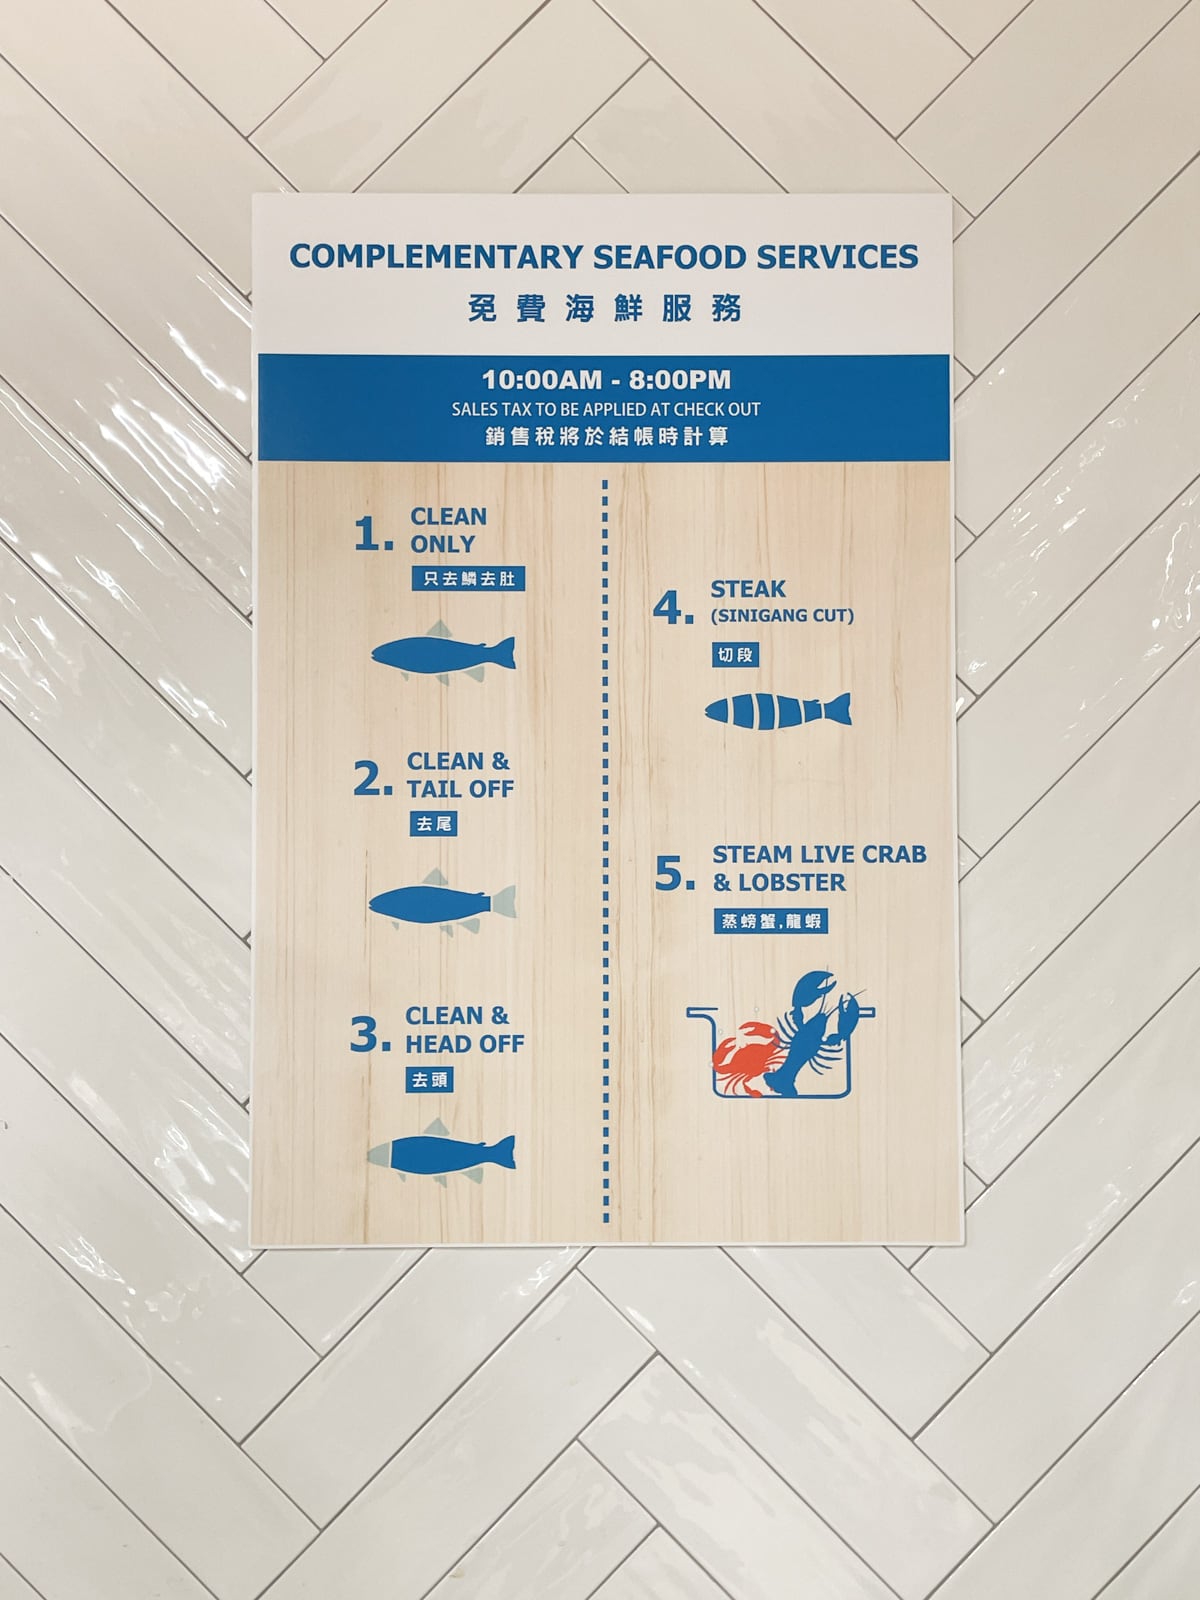 A poster from the seafood section at a 99 Ranch Market showing the "Complementary Seafood Services" available to customers, including 1) Clean Only, 2) Clean and Tail Off, 3) Clean and Head Off, 4) Steam (Sinigang Cut), and 5) Steam Live Crab and Lobster.